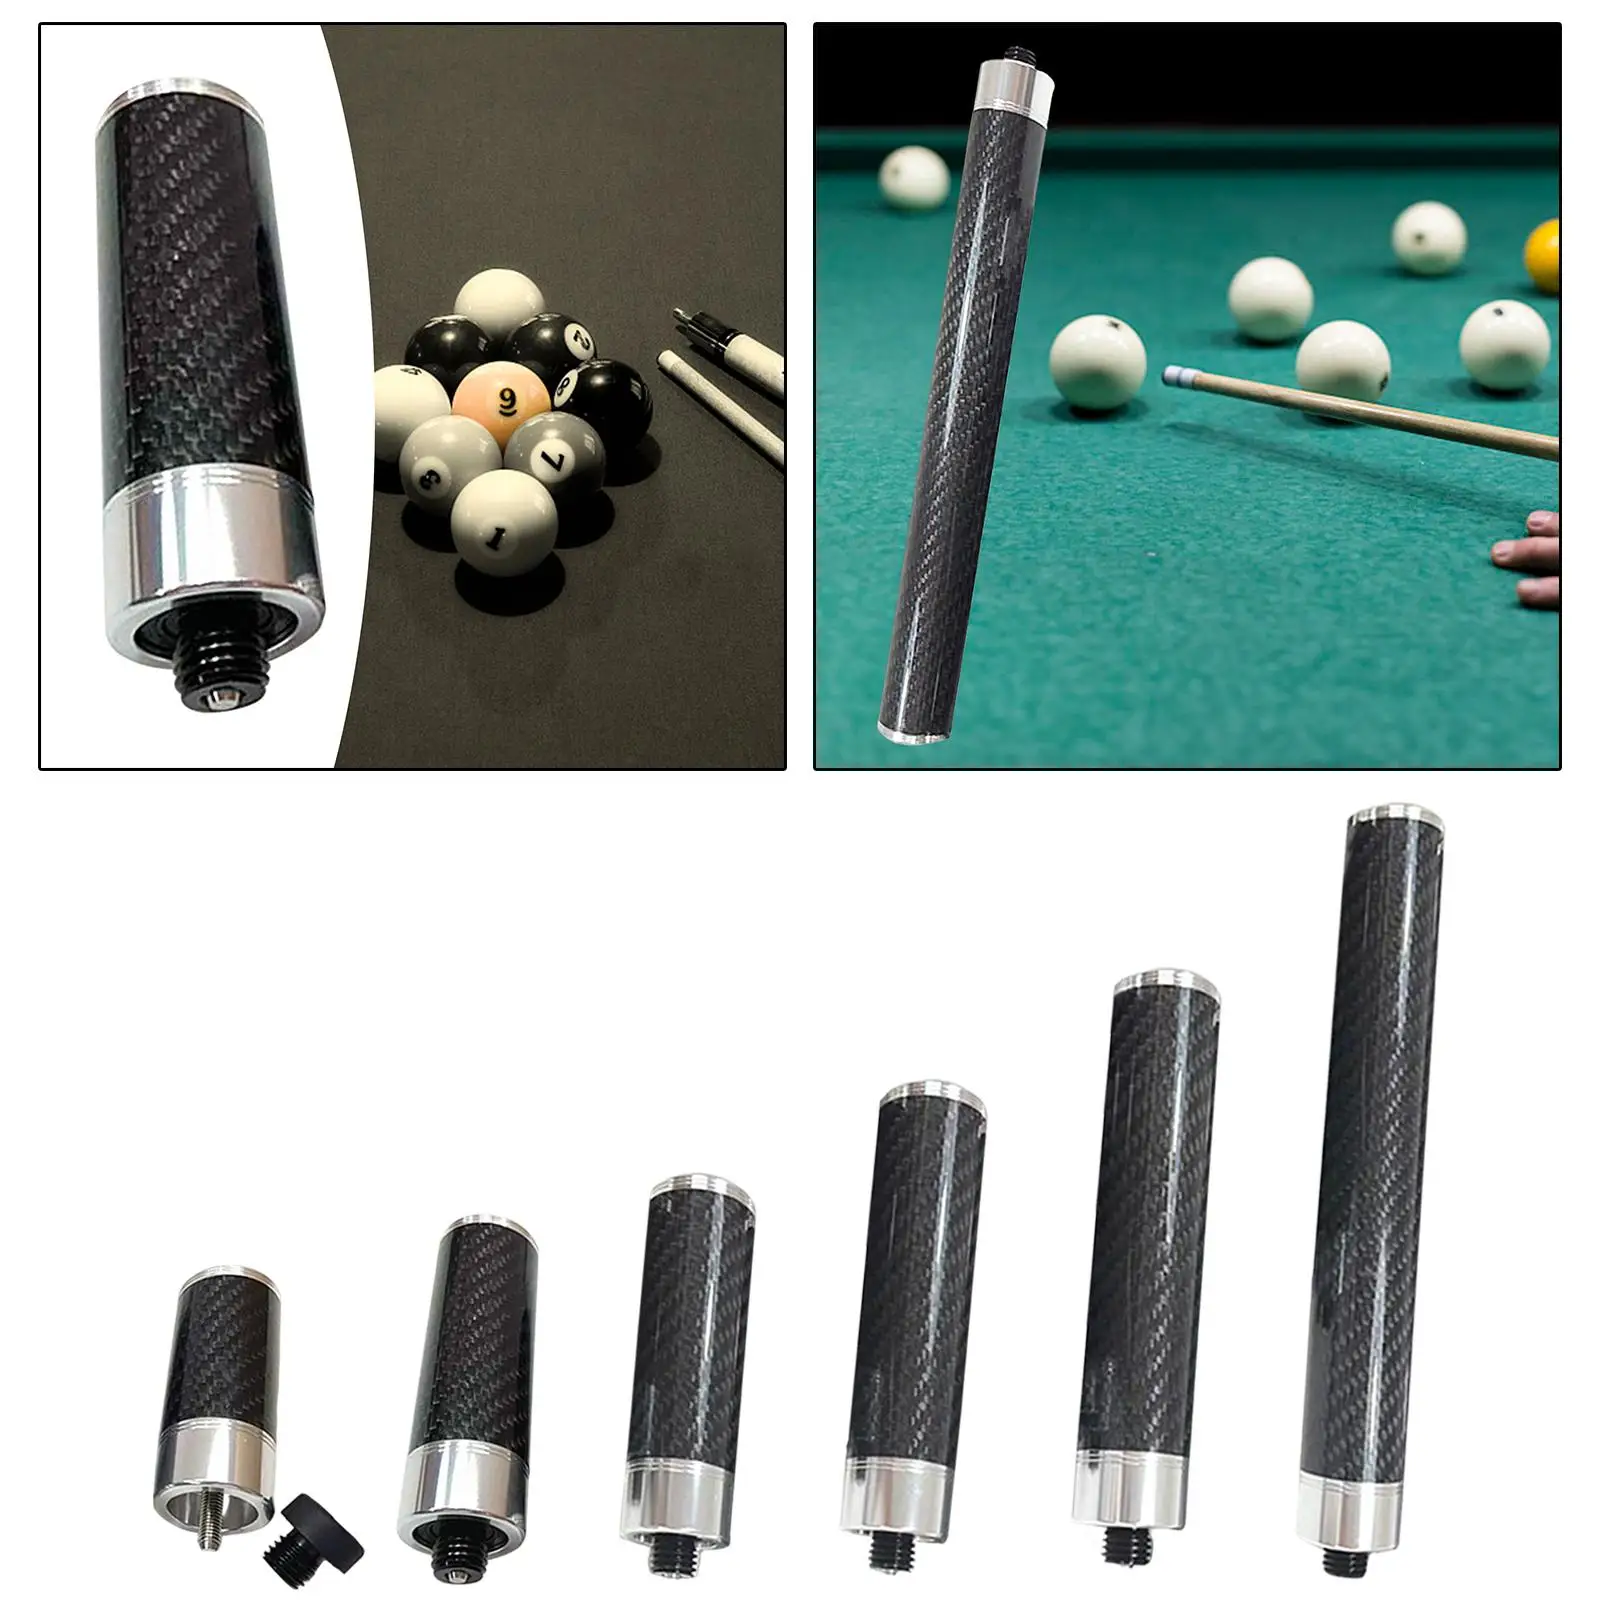 Cue End Extender with Bumper Lightweight Snooker Cue Stick Billiards Pool Cue Extension for Games Enthusiast Training Lovers